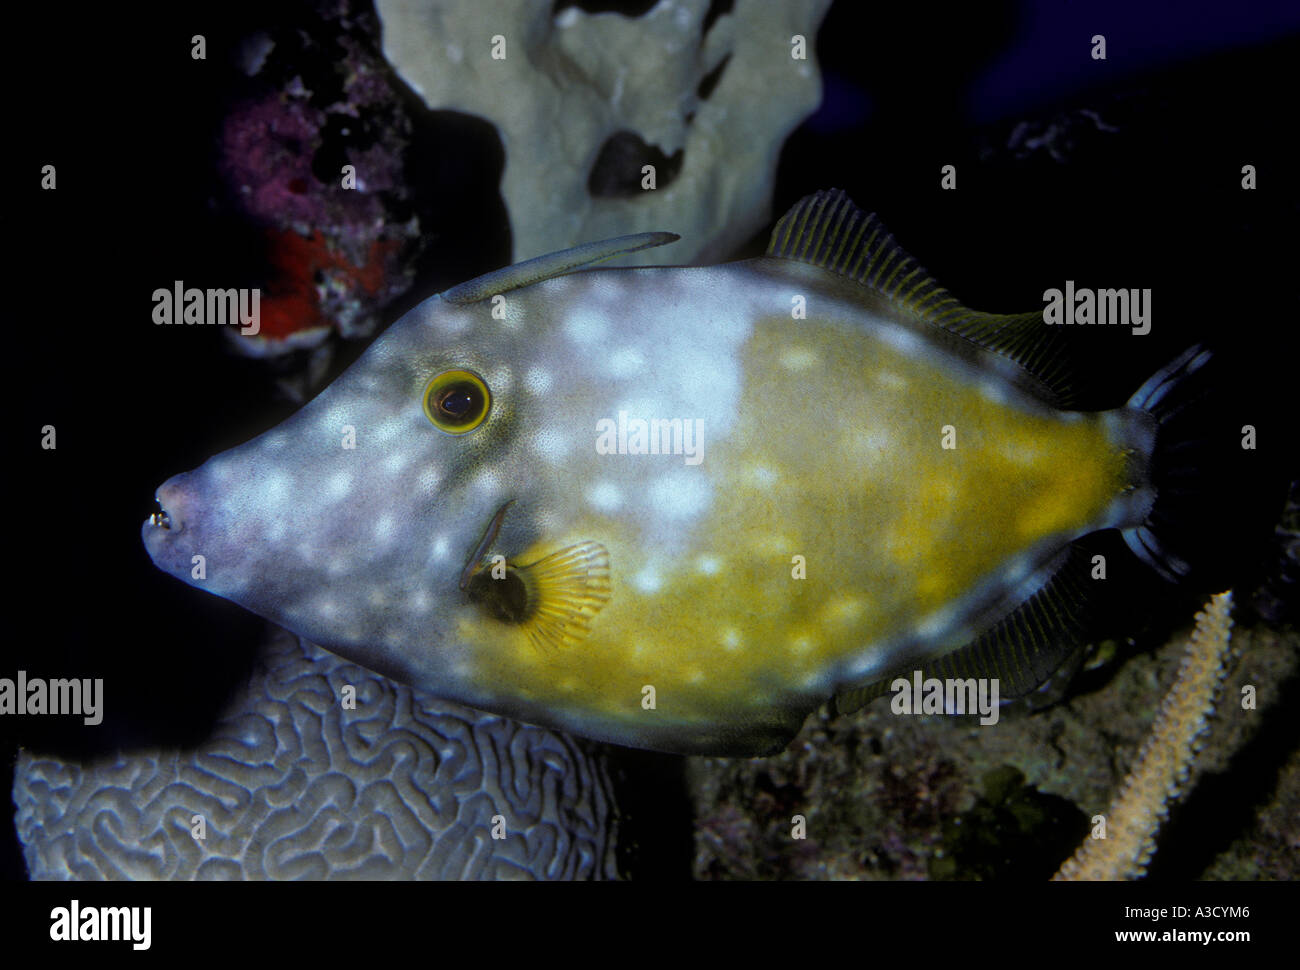 Whitespotted filefish, Cantherhines macrocerus, underwater observatory, Coral World, Silver Cay, New Providence, The Bahamas Stock Photo